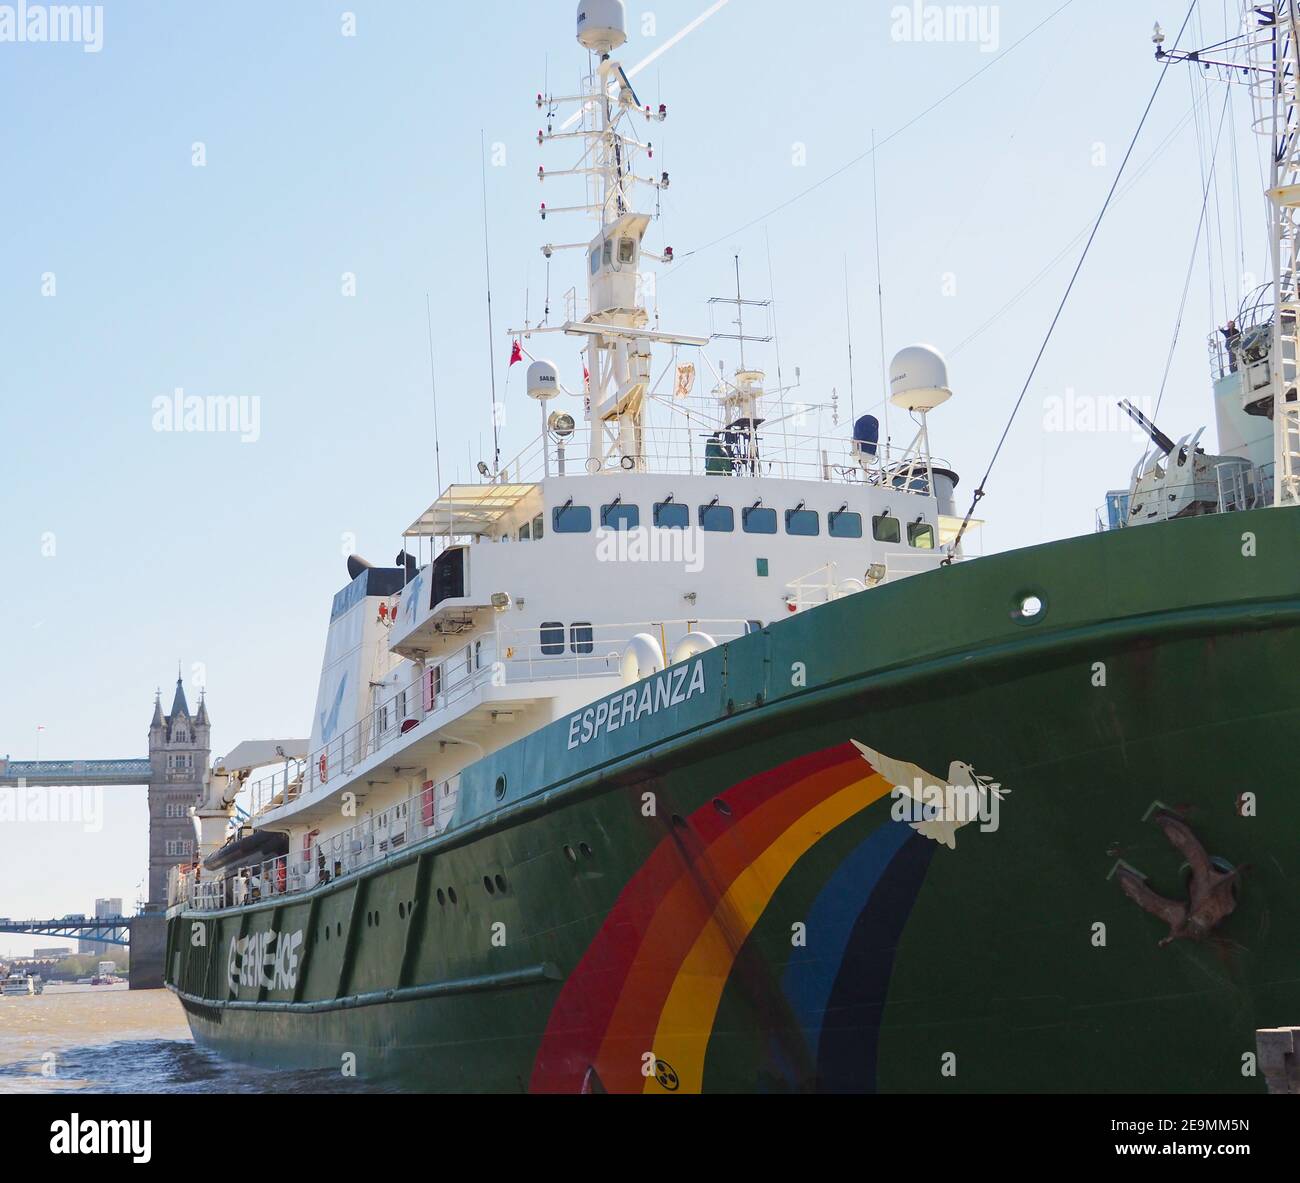 the Greenpeace ship Esperanza docked on the river Thames in London with Tower Bridge in the background, April 2019 Stock Photo